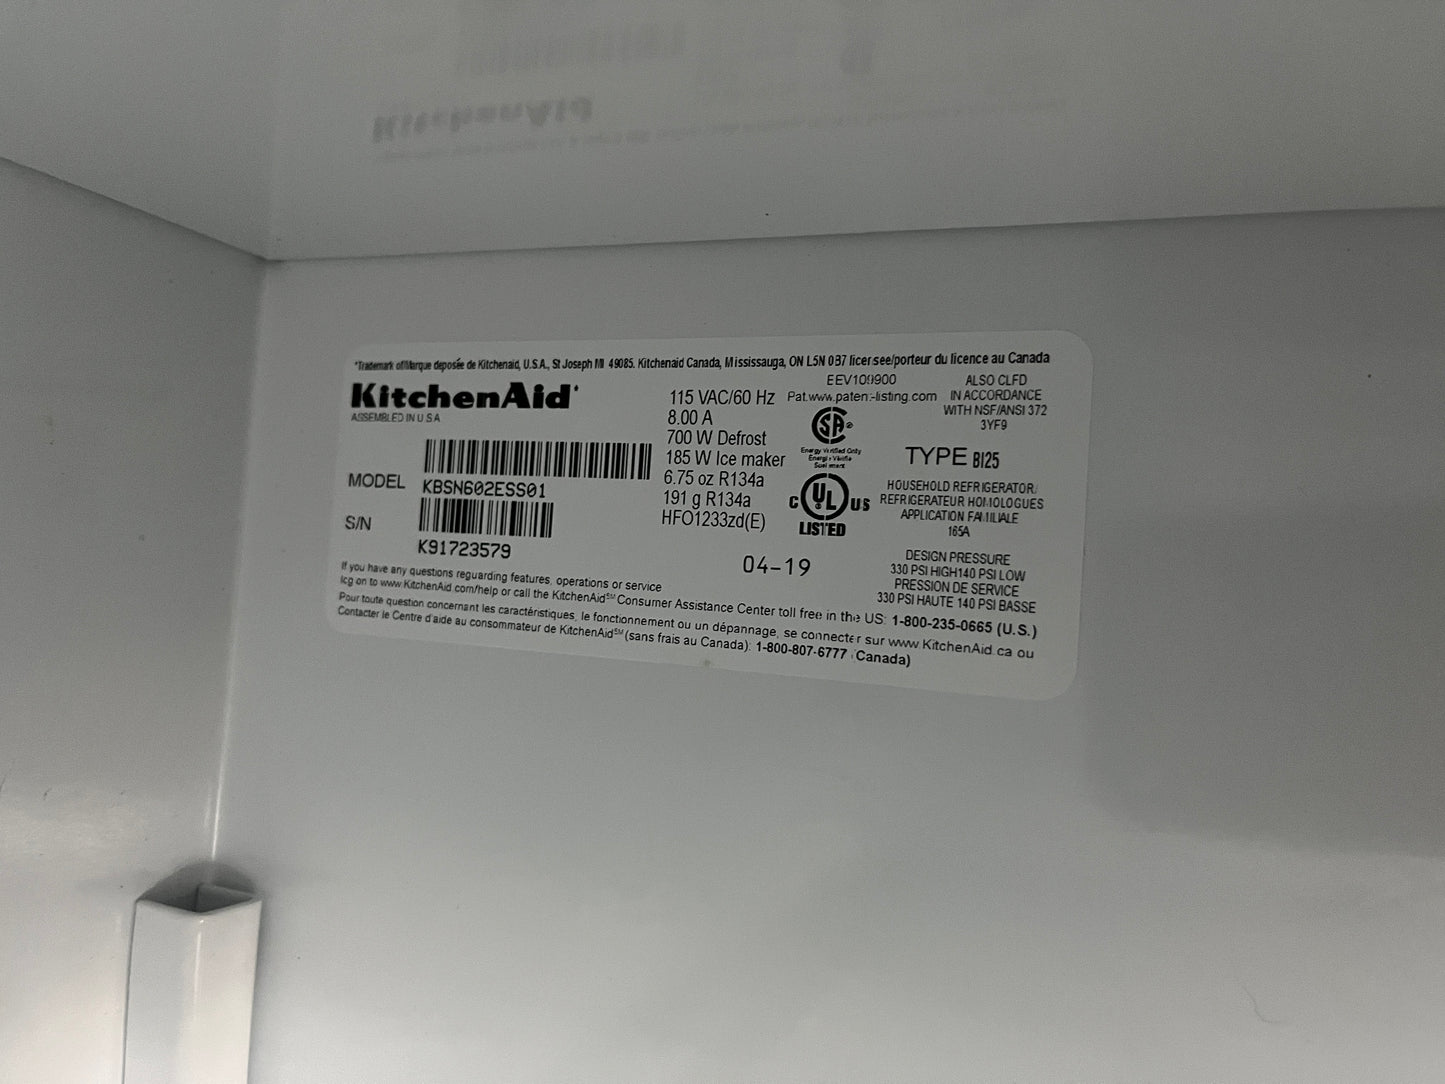 KitchenAid KBSN602ESS 42 Inch Built-In Side by Side Refrigerator in Stainless Steel, 369257